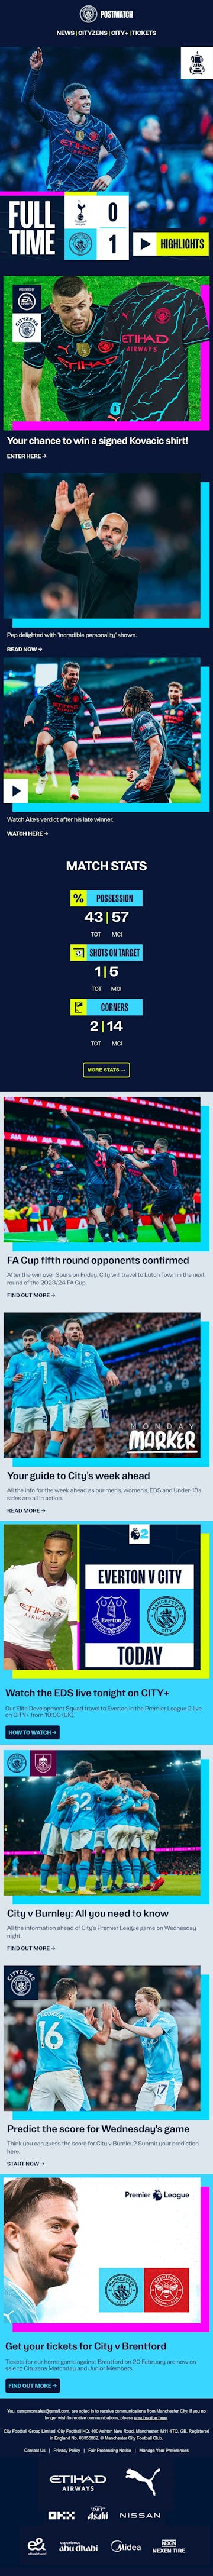 Man City Email Design Thumbnail Preview